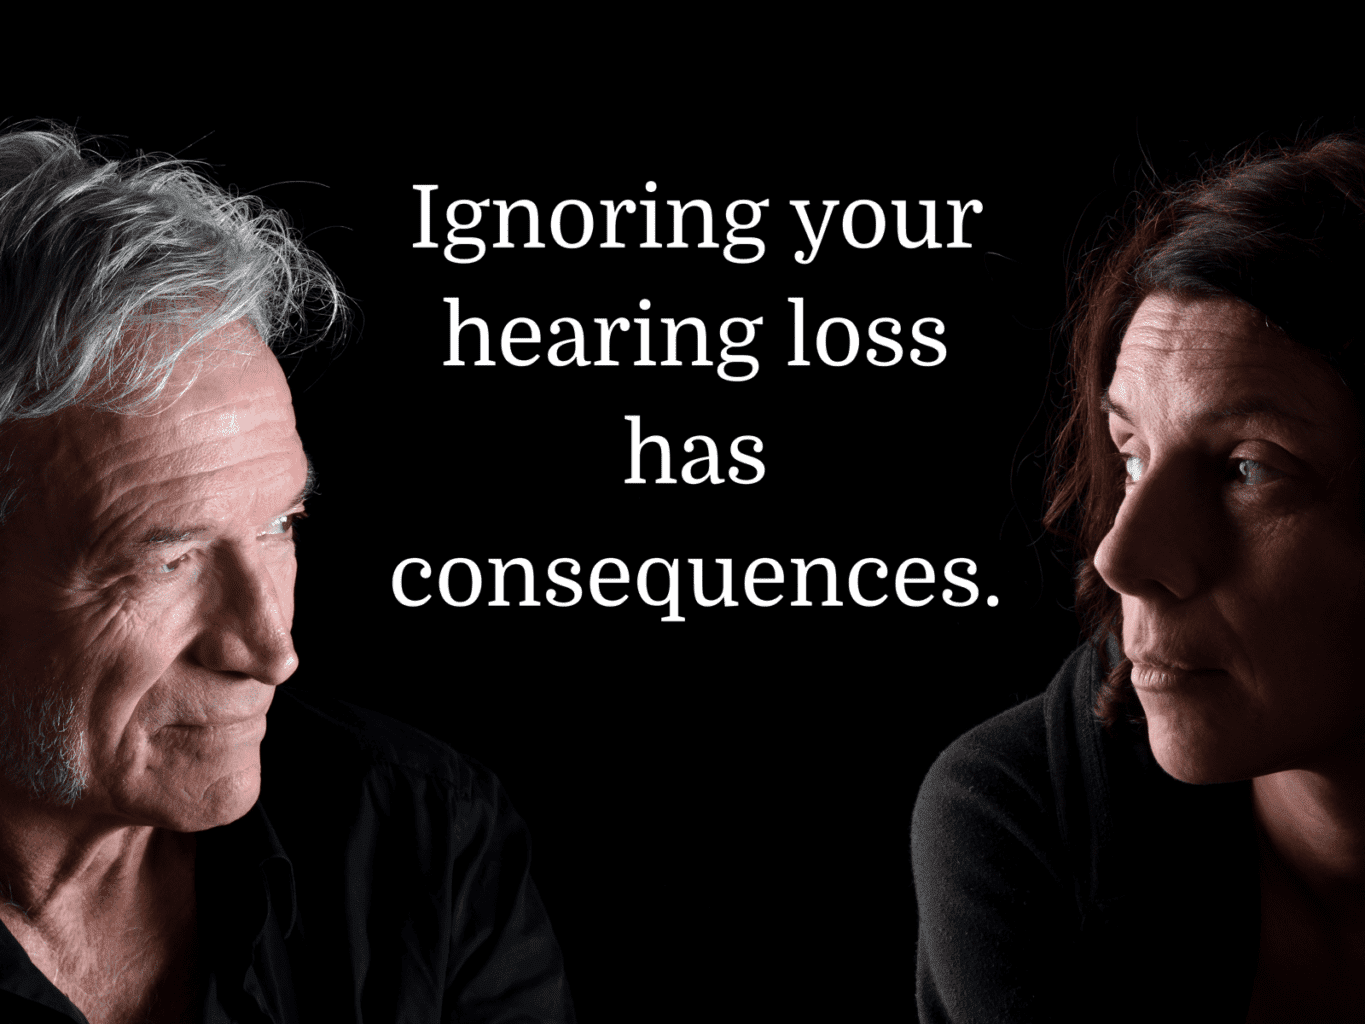 Ignoring your hearing loss has consequences